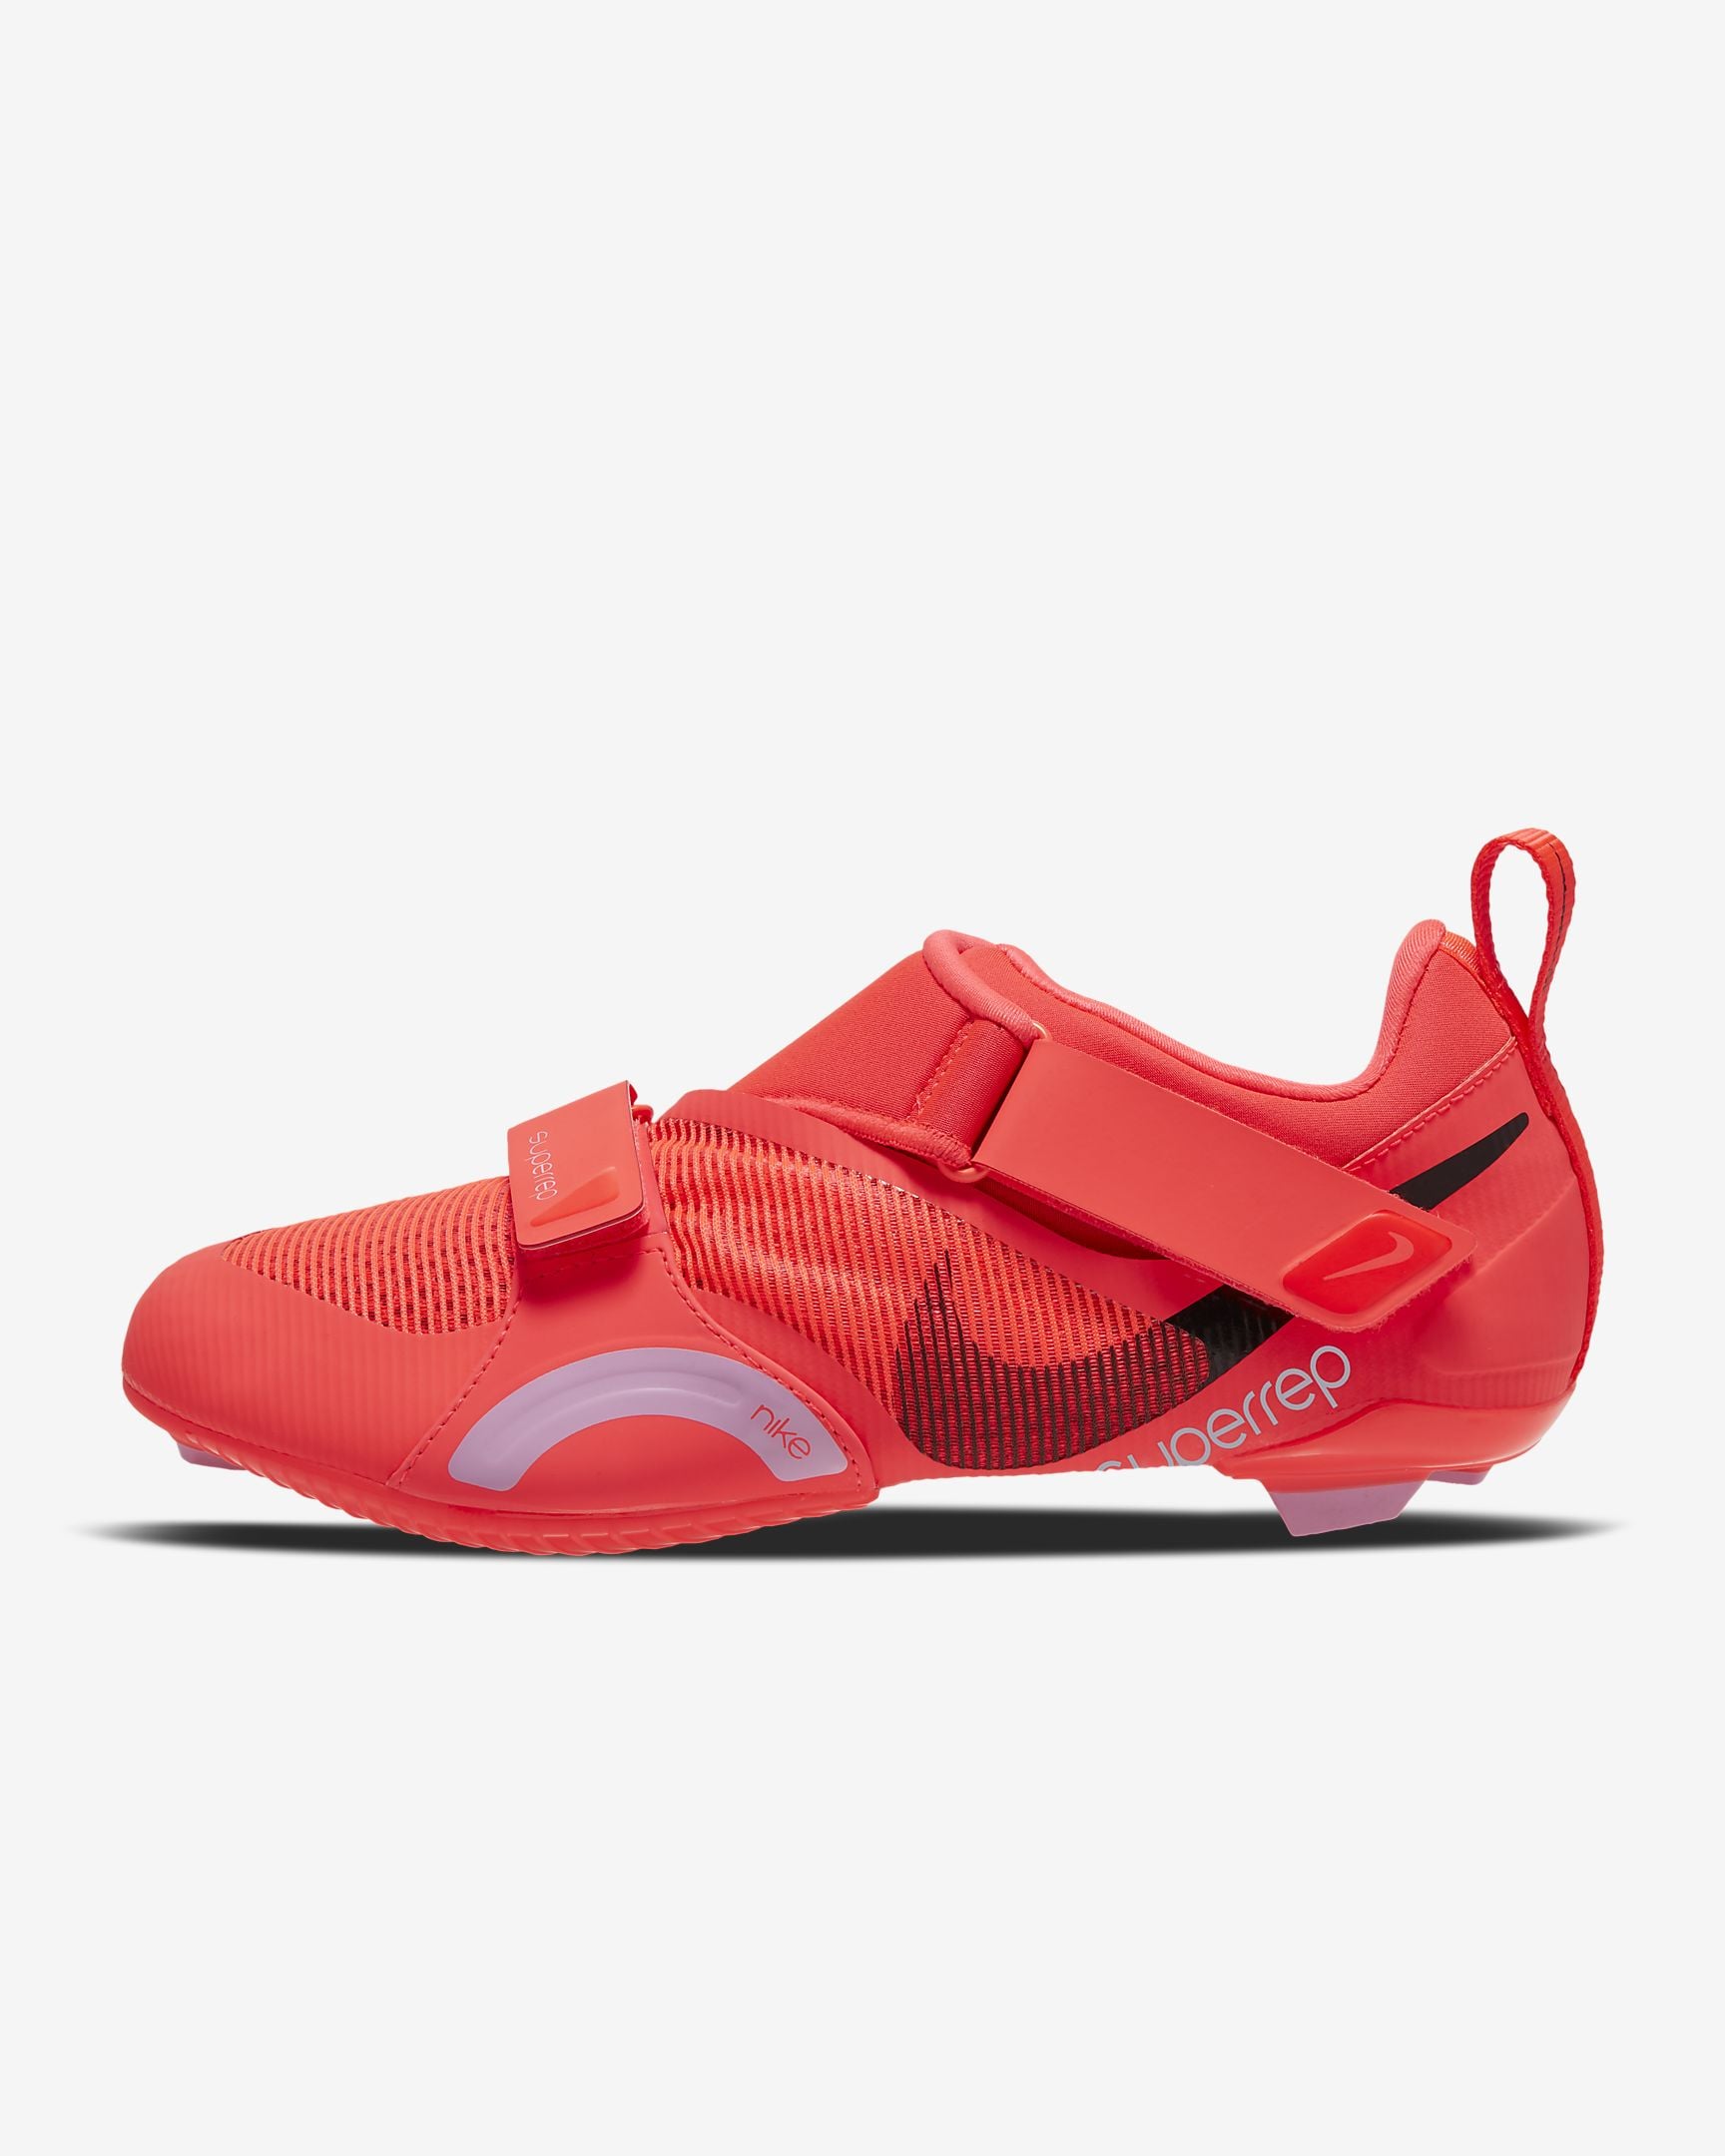 Nike SuperRep Cycle Shoe in Flash Crimson | Fitness-Lovers Are Going to Be  Obsessed With These Nike Indoor Cycling Shoes | POPSUGAR Fitness Photo 3